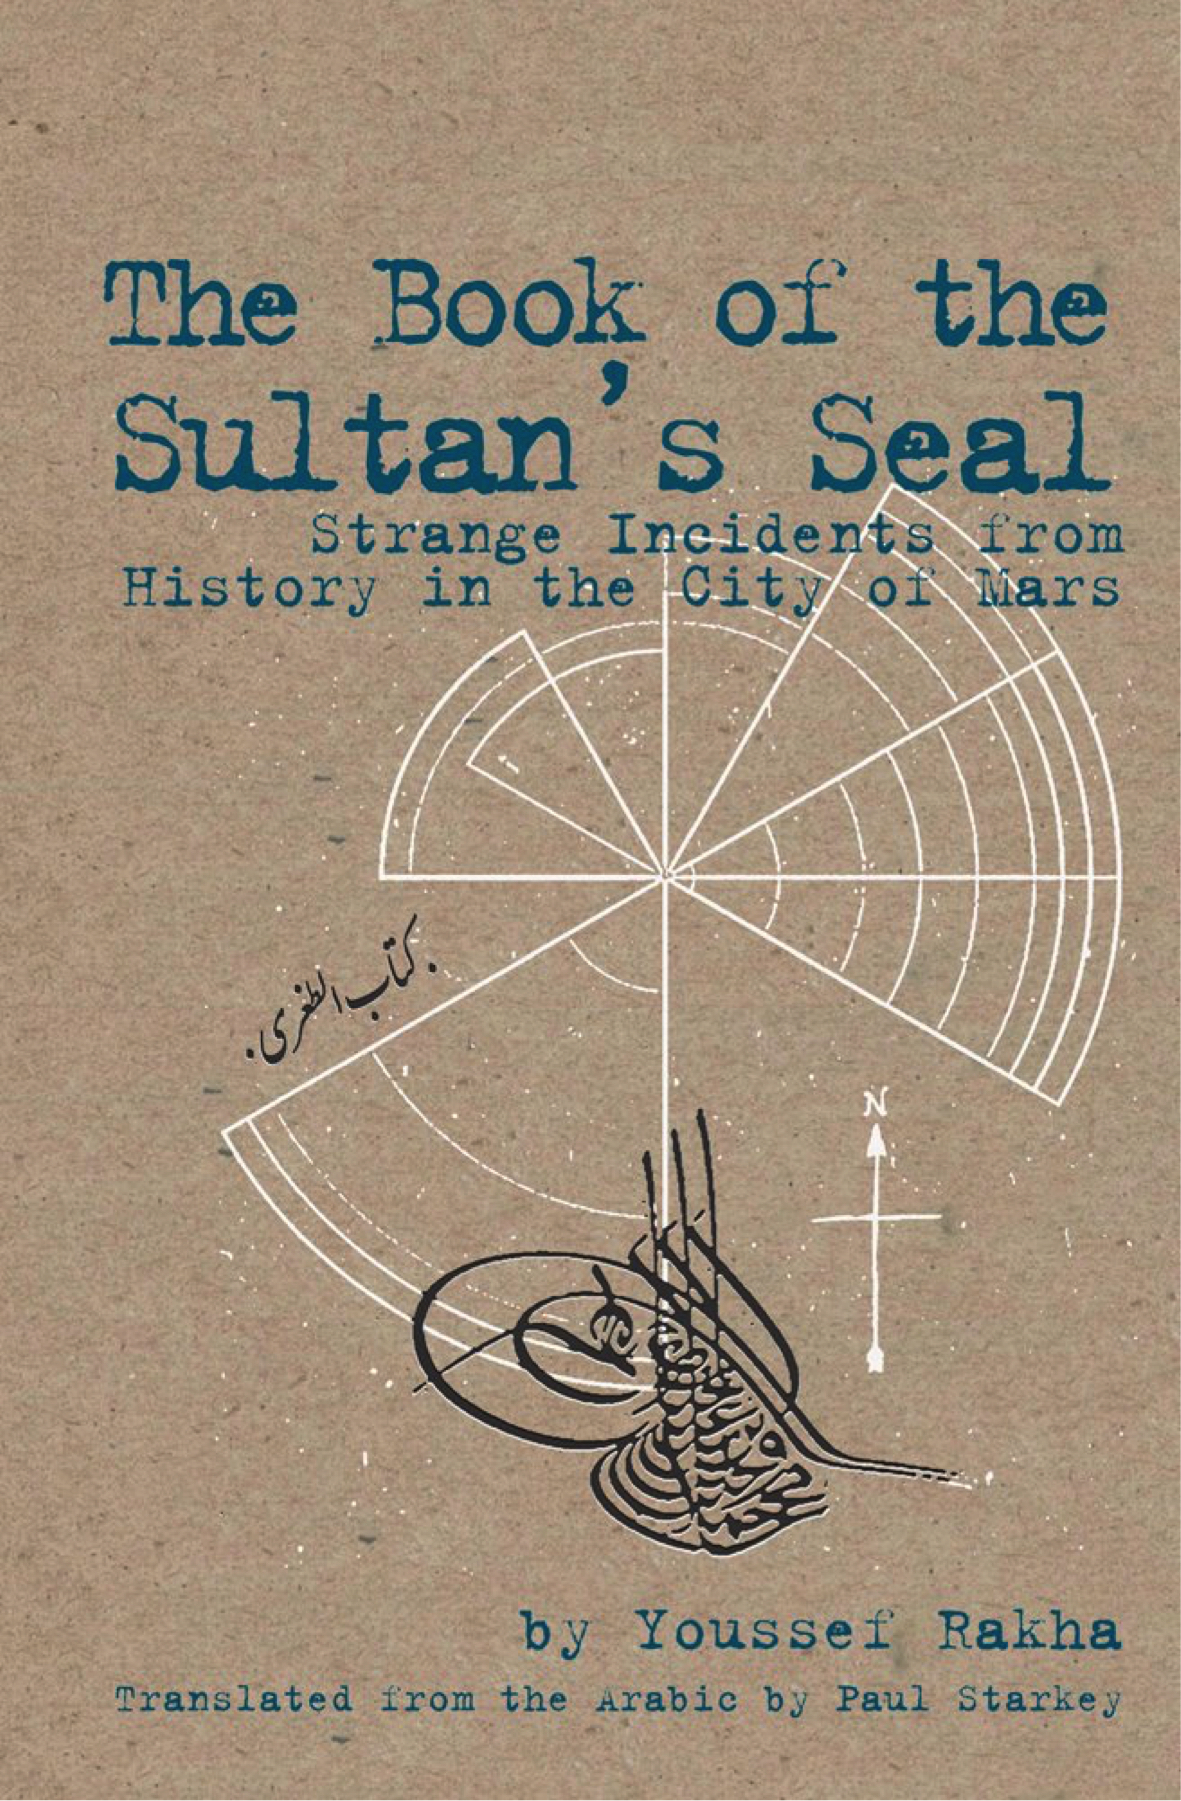 Youssef Rakhas erster Roman "The Book of the Sultan's Seal"